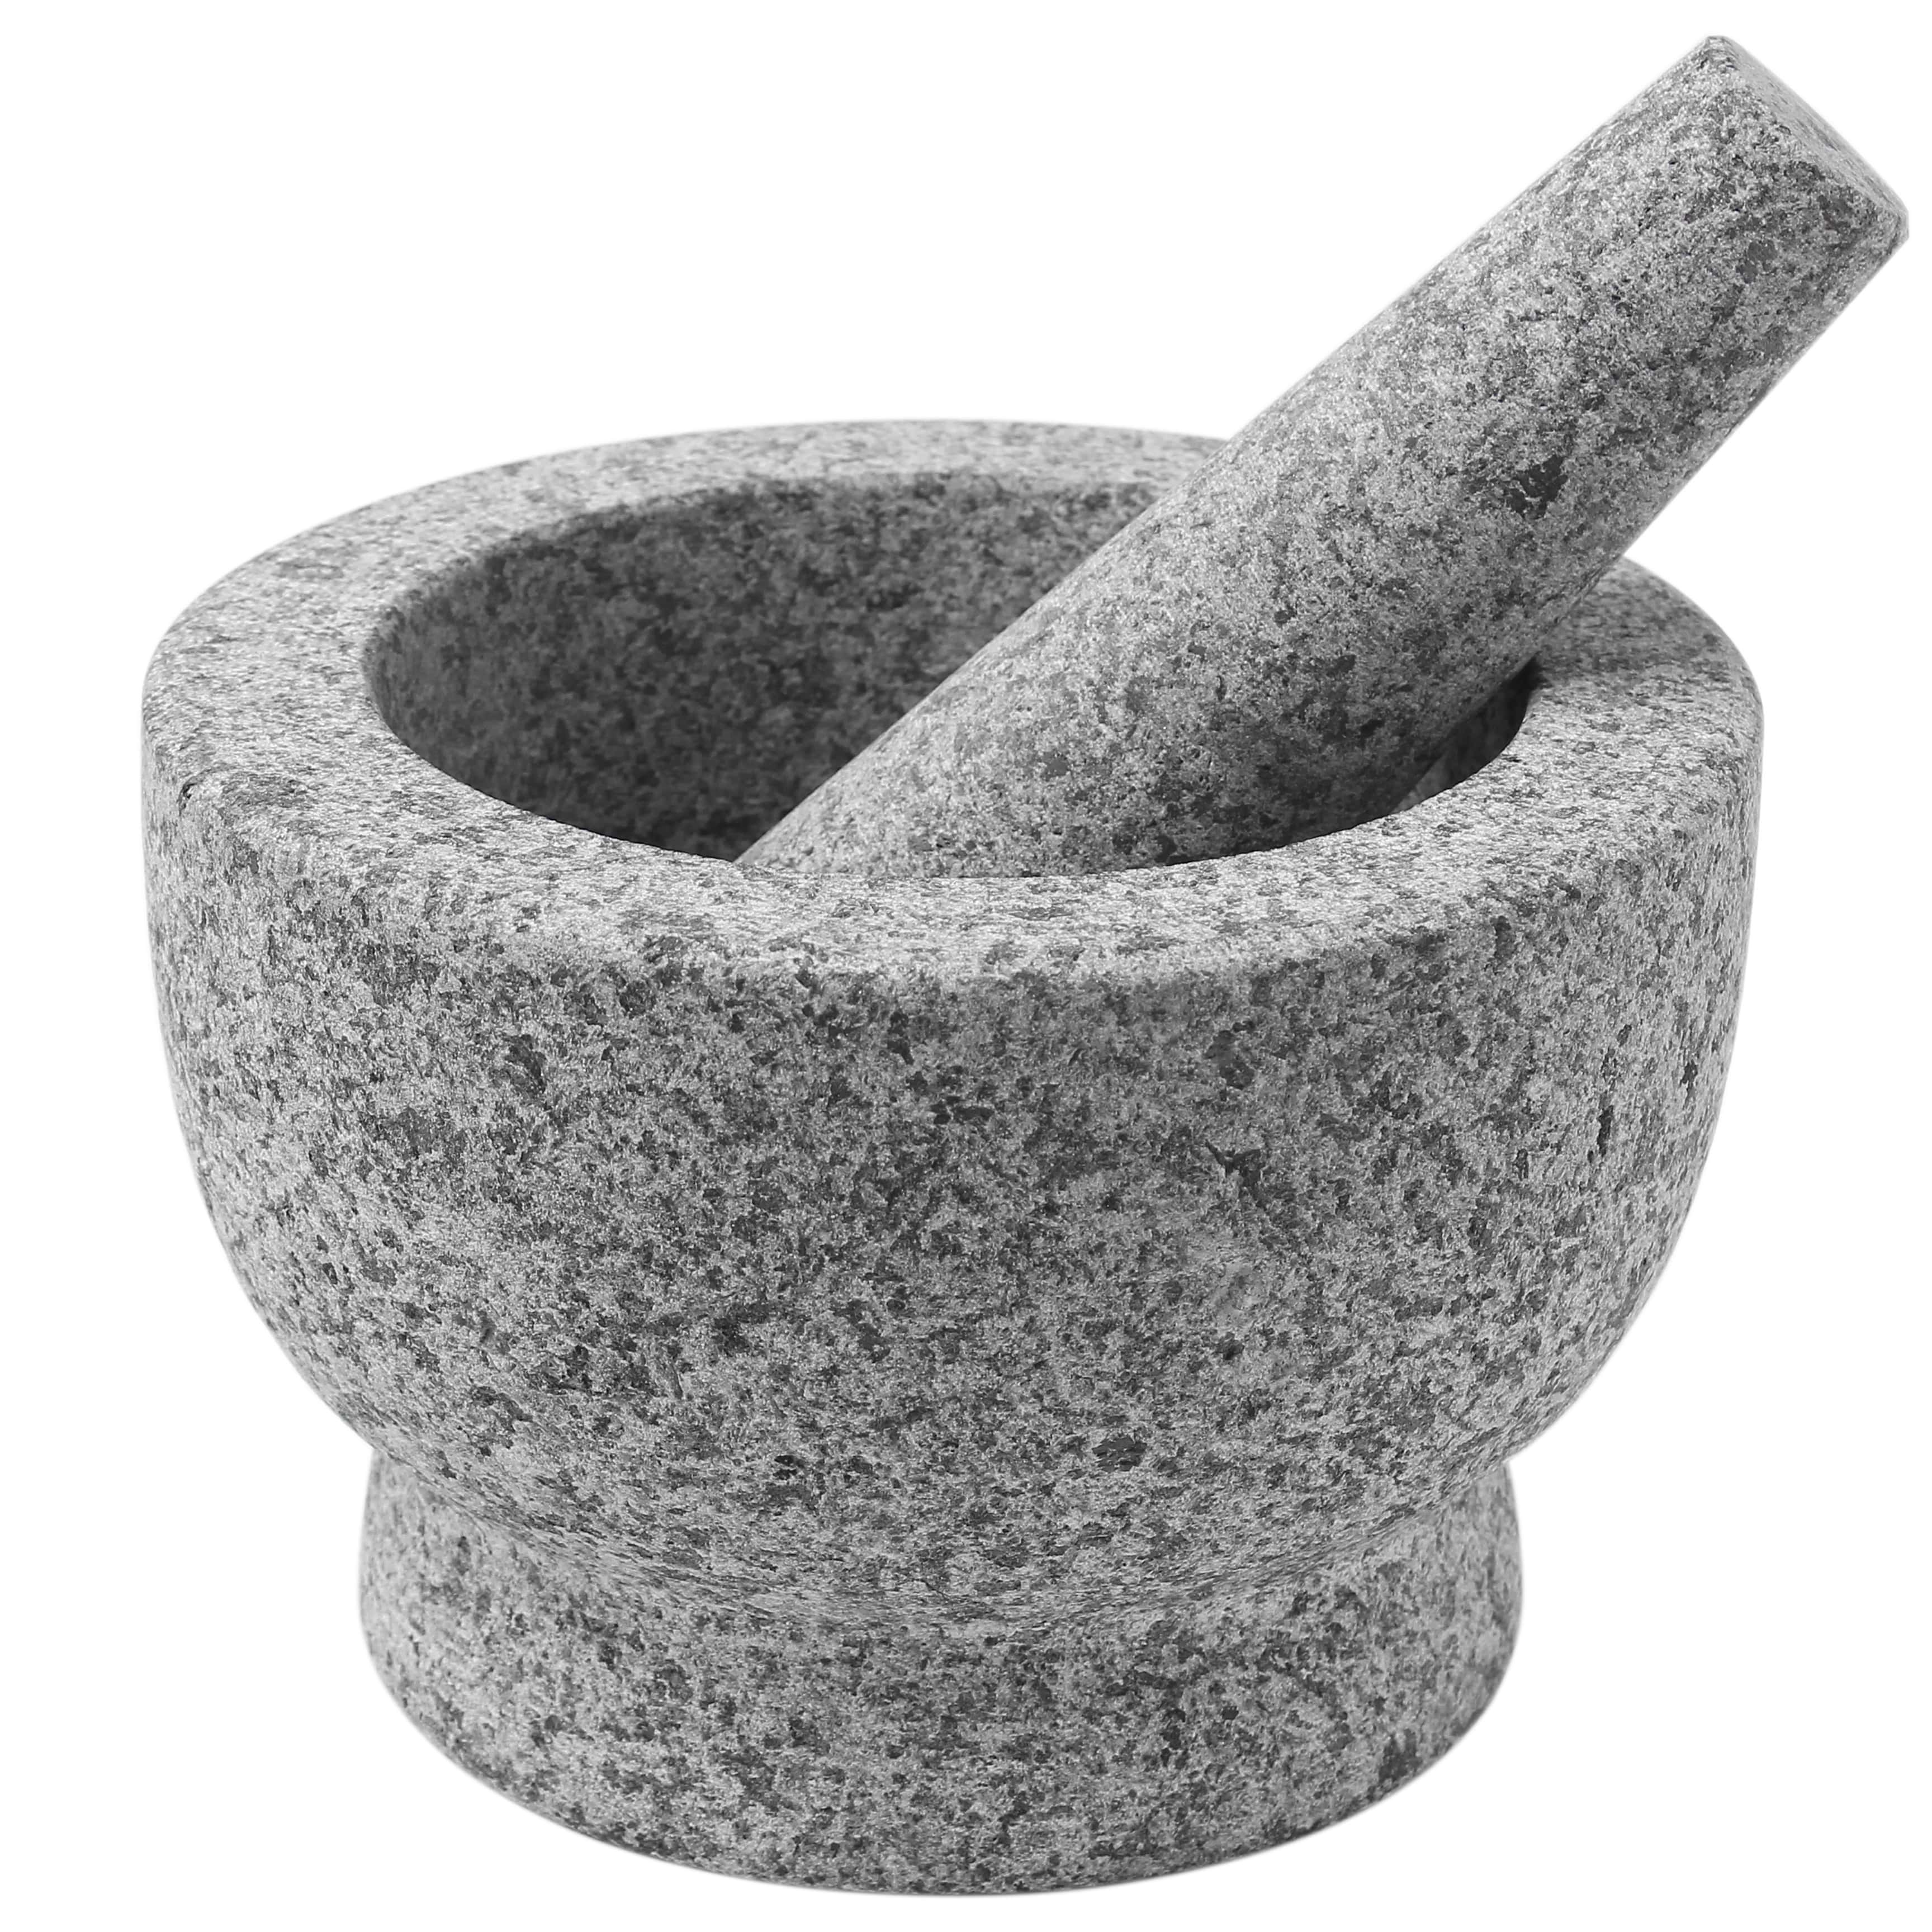 ChefSofi Mortar and Pestle Set - 6 Inch, 2 Cup-Capacity, 7 pounds - $19.82 + Free Shipping for Amazon Prime Members